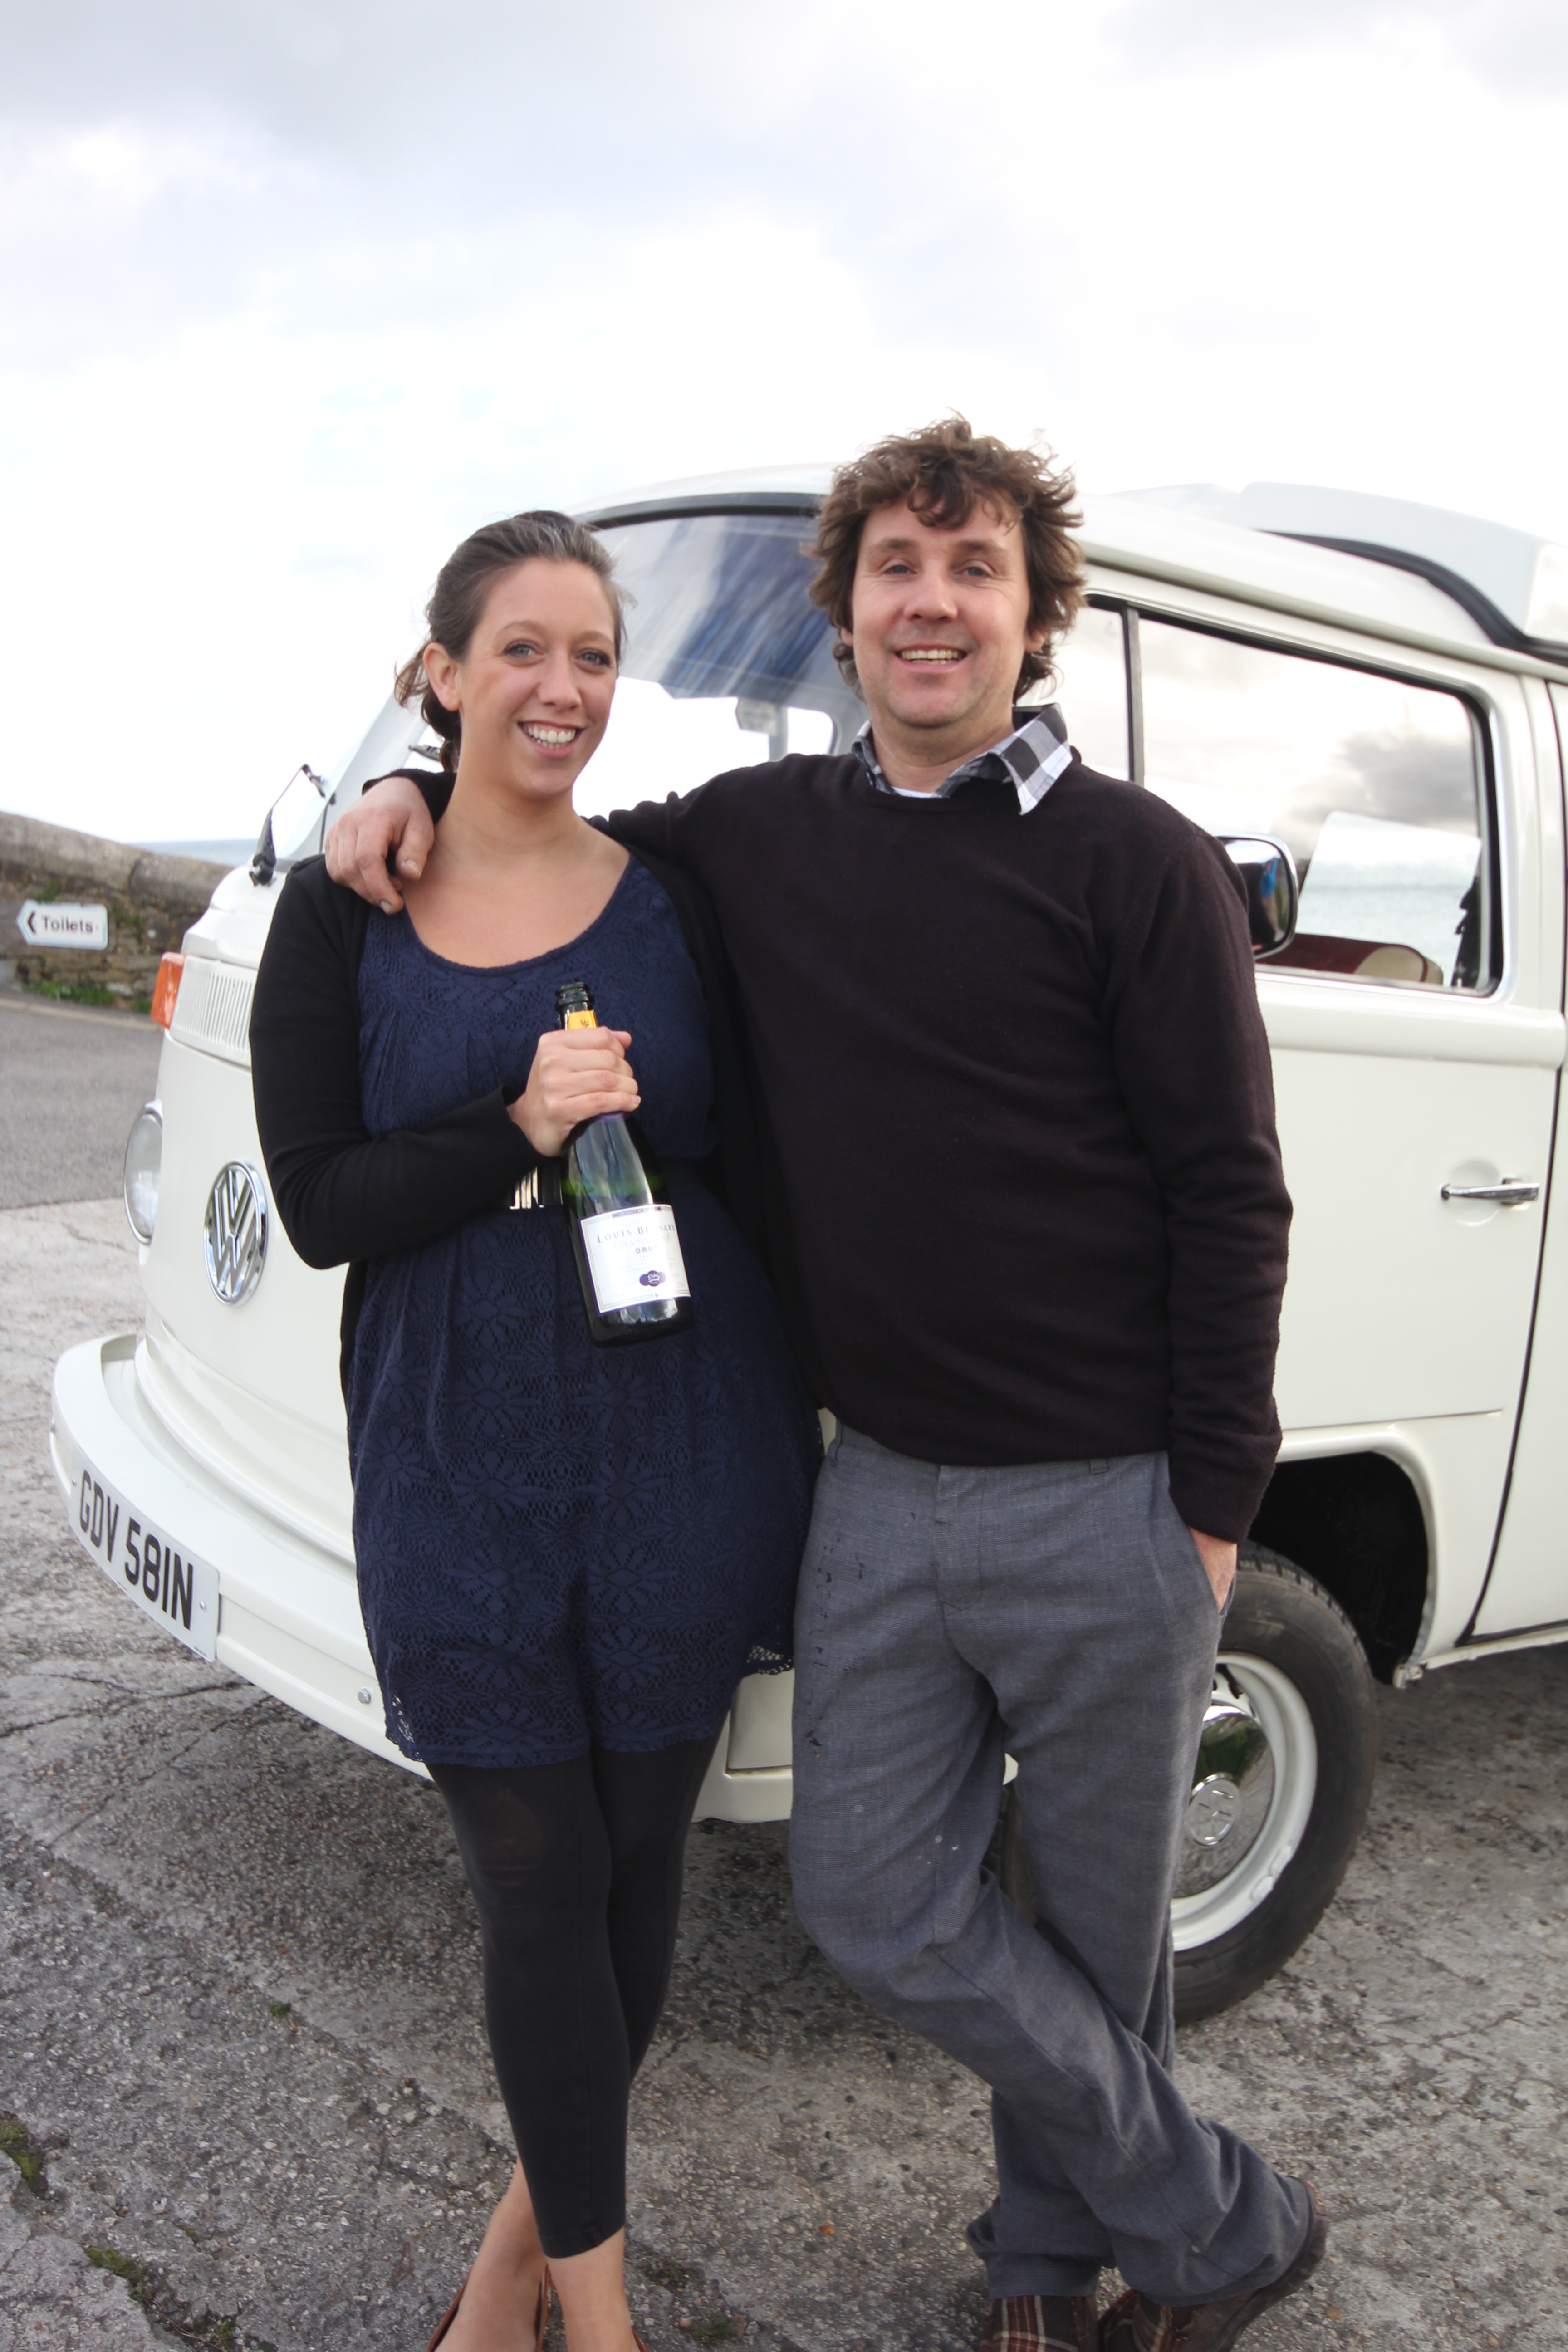 Jess Ratty and Ben Ford from The Cornwall Camper Company